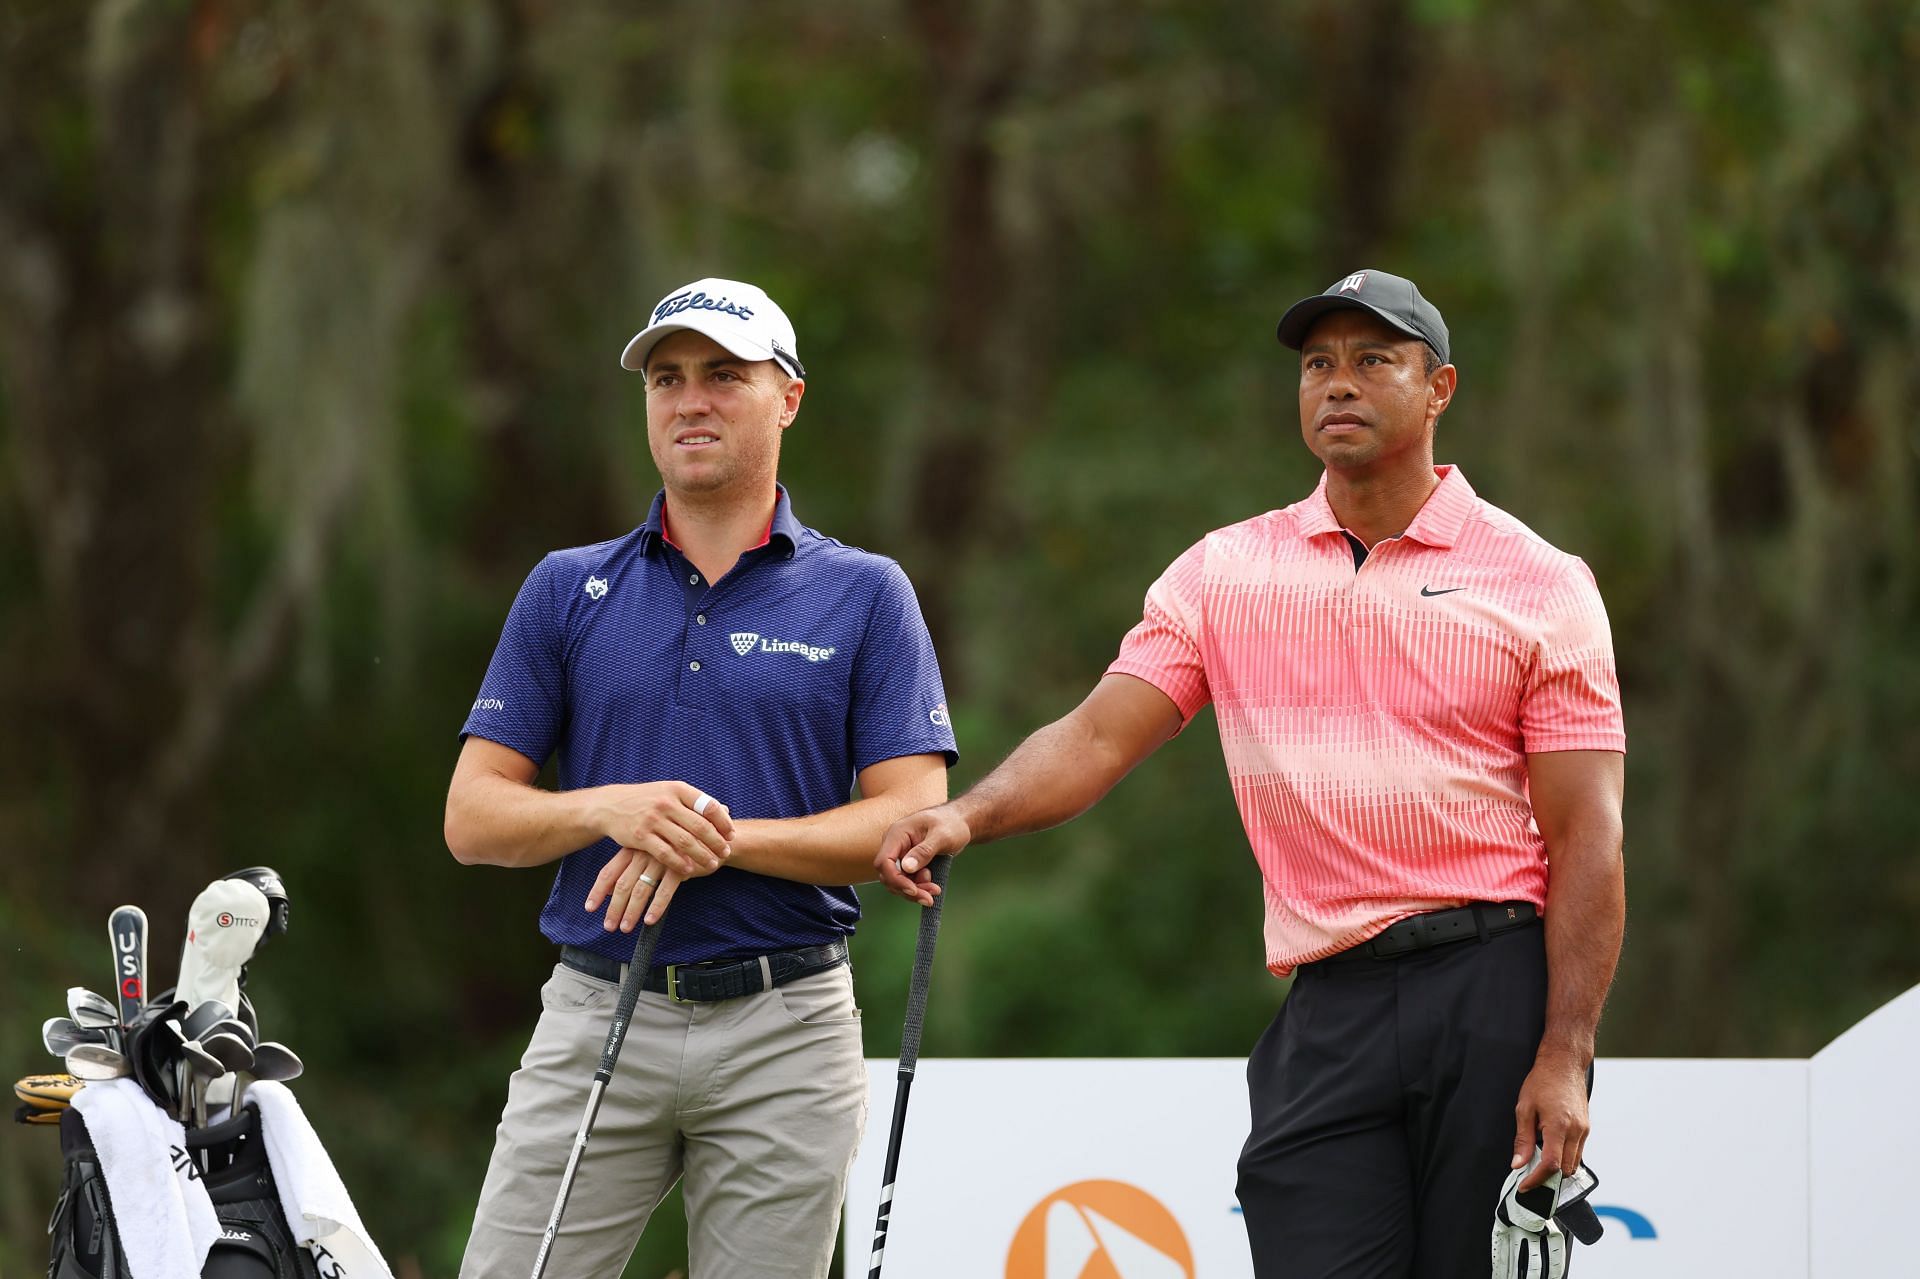 “He is such a good dad” – Justin Thomas on family man Tiger Woods